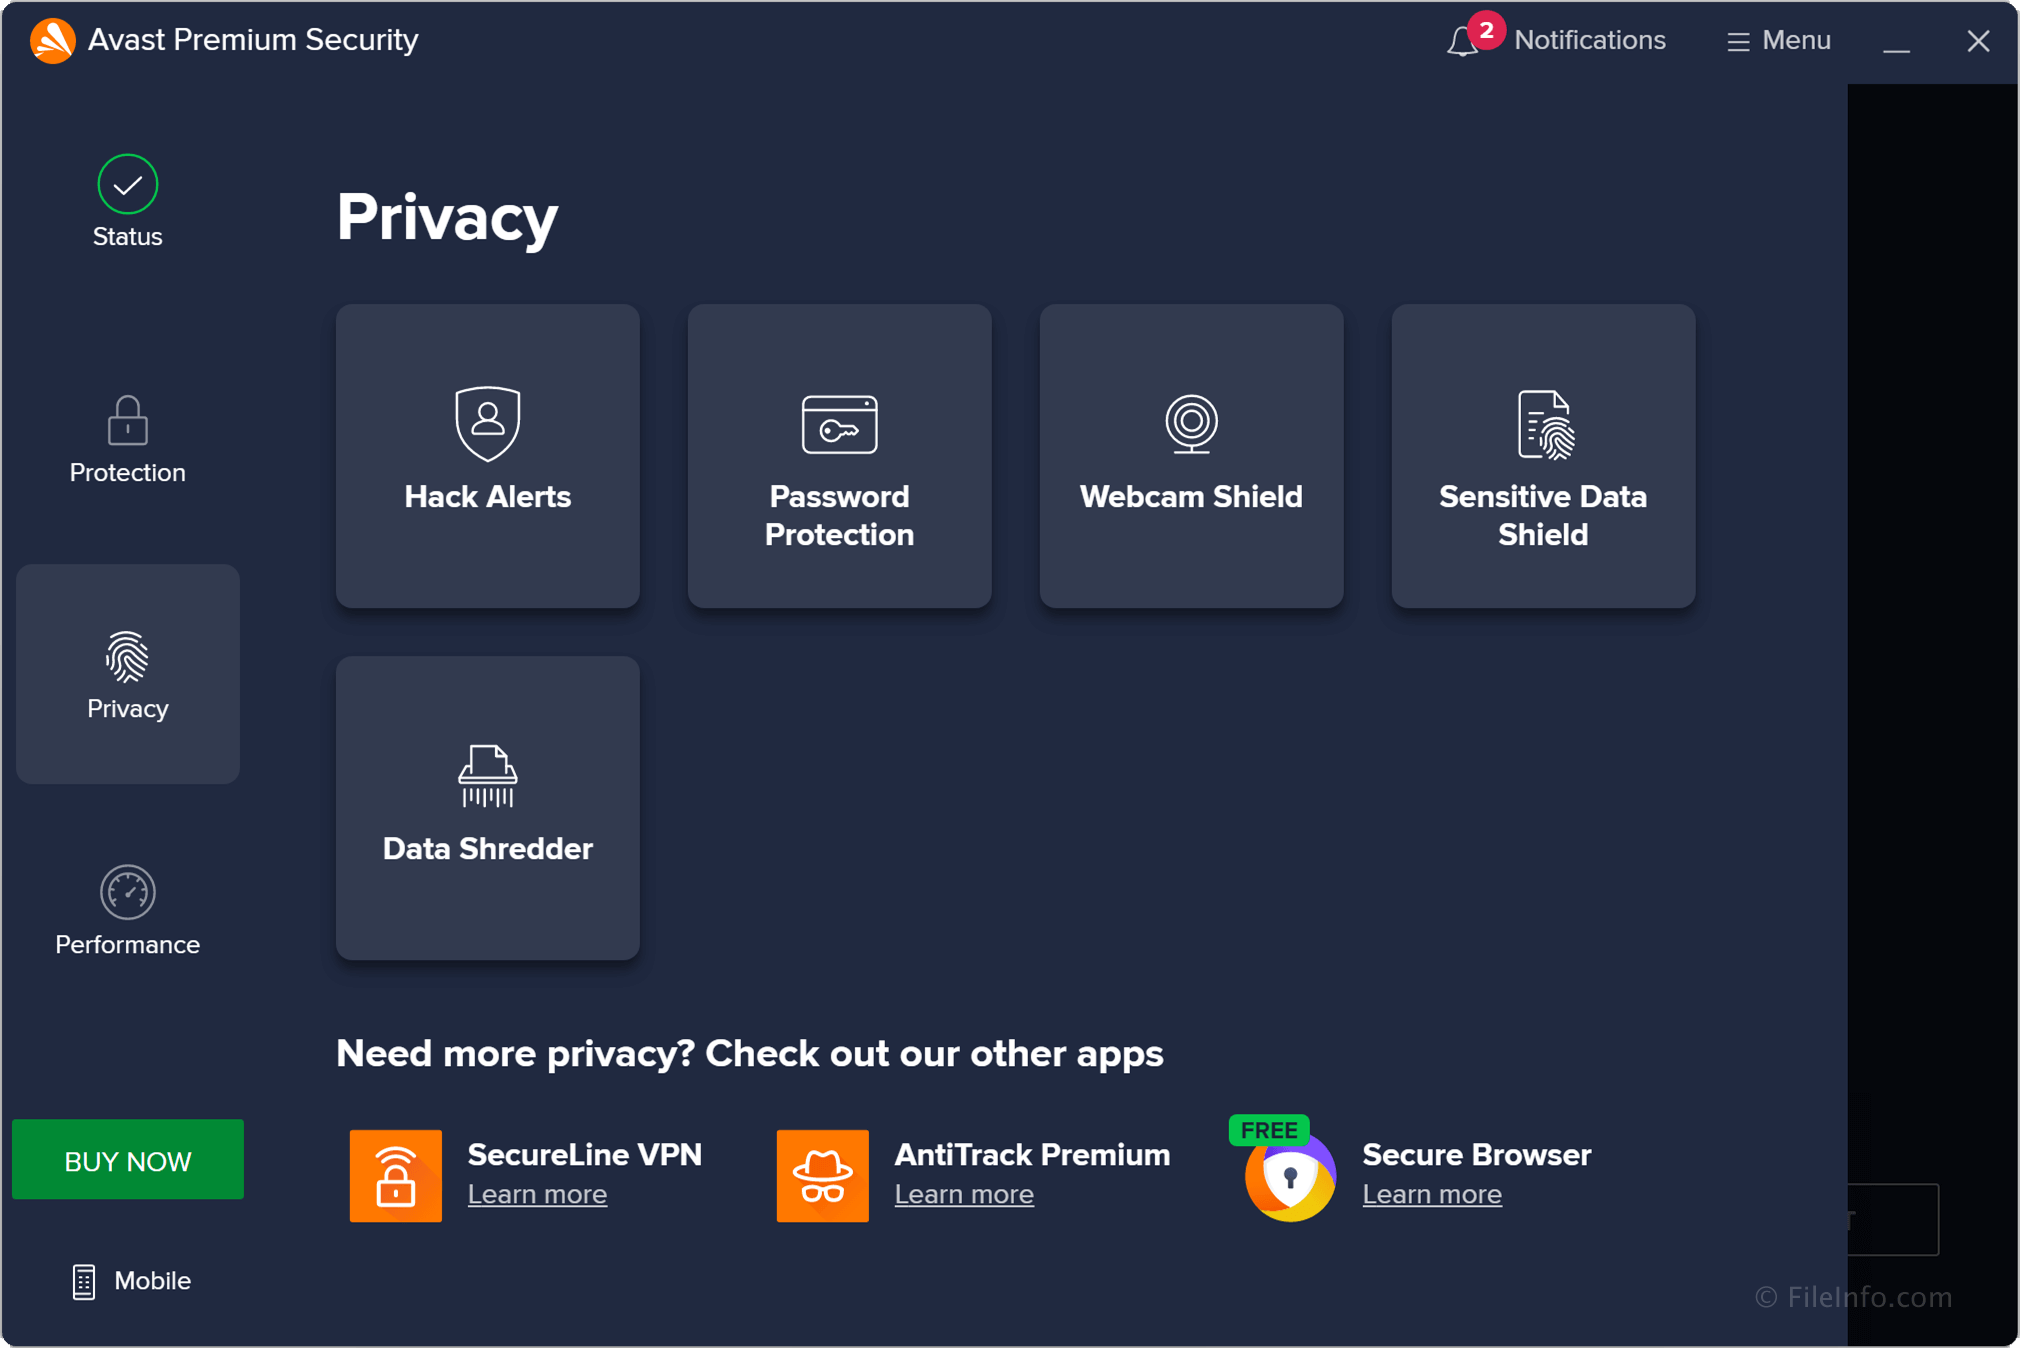 Avast Premium Security 2022 Supported File Formats